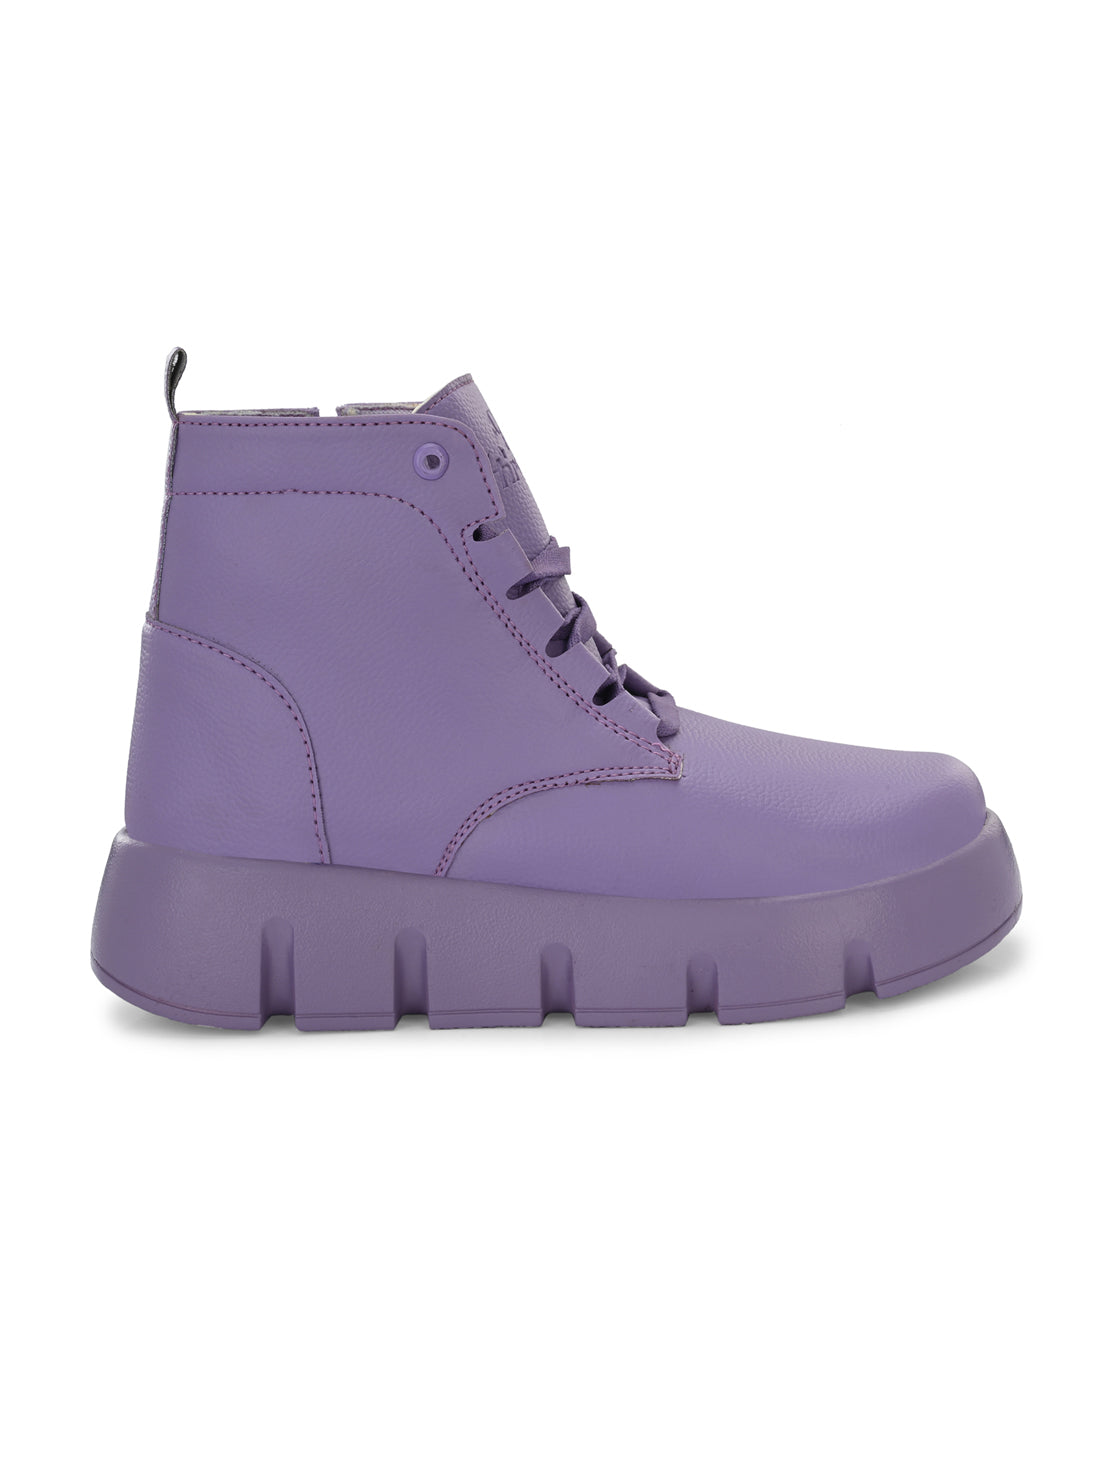 Hirolas® Women Purple Chunky Casual Lace-Up Ankle HighBoots (HRLWF18PPL)